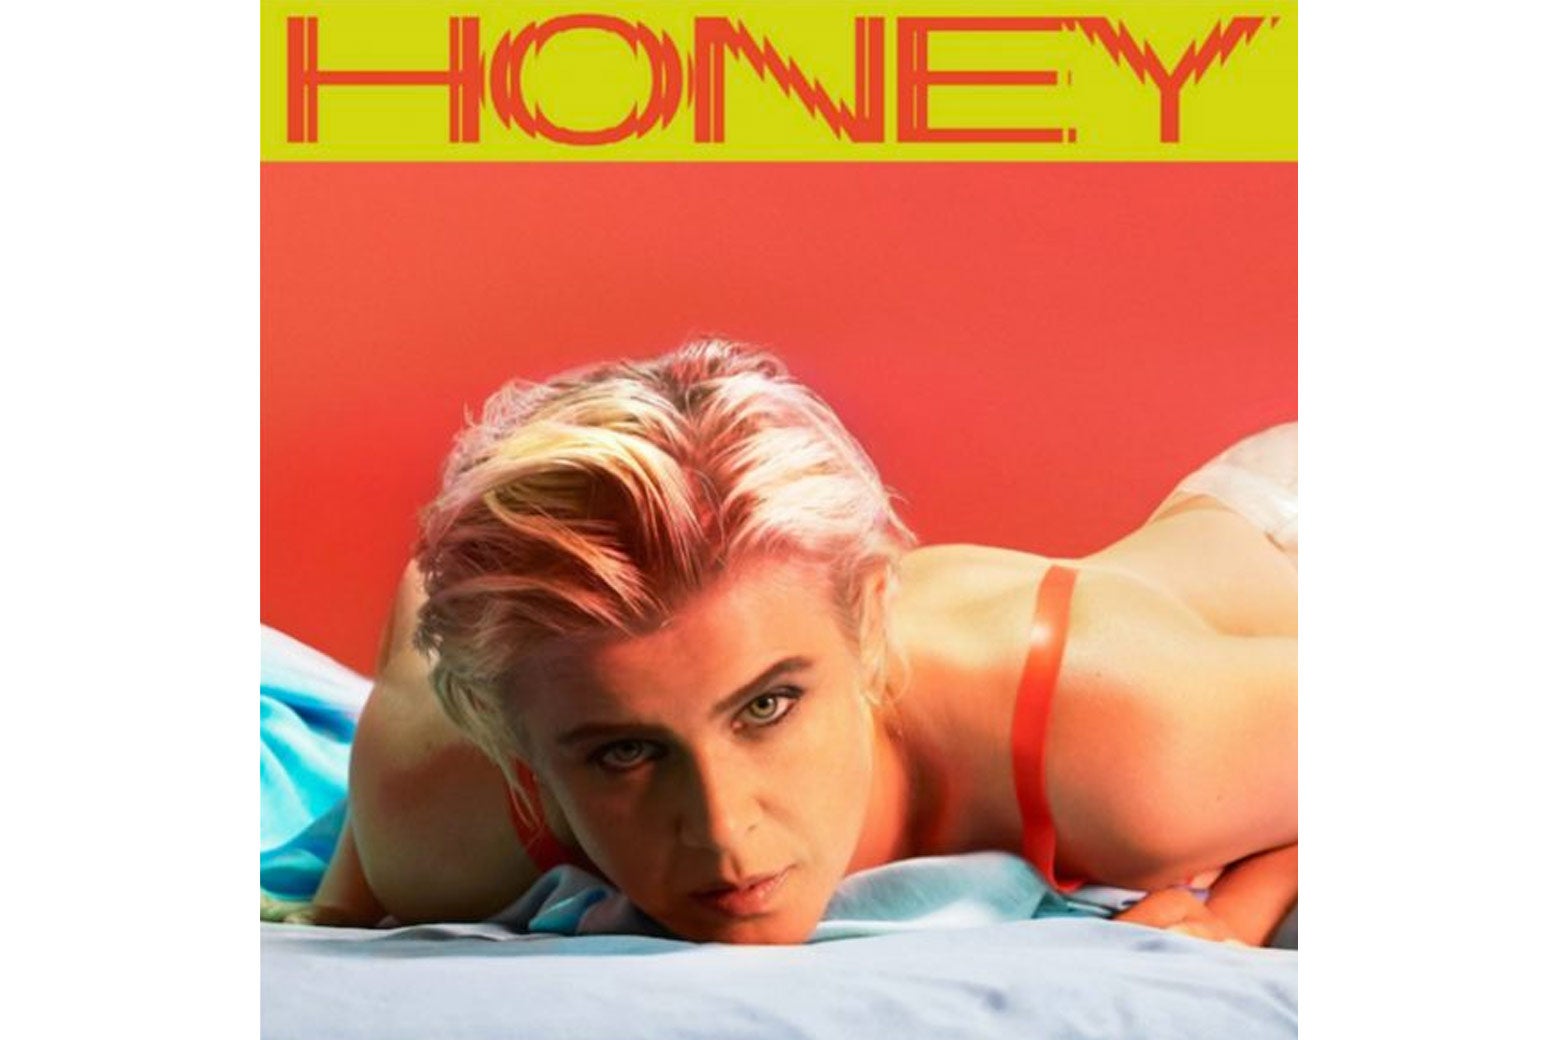 The cover of Robyn's new album, Honey. Robyn is lying on her chest in lingerie, looking forward.